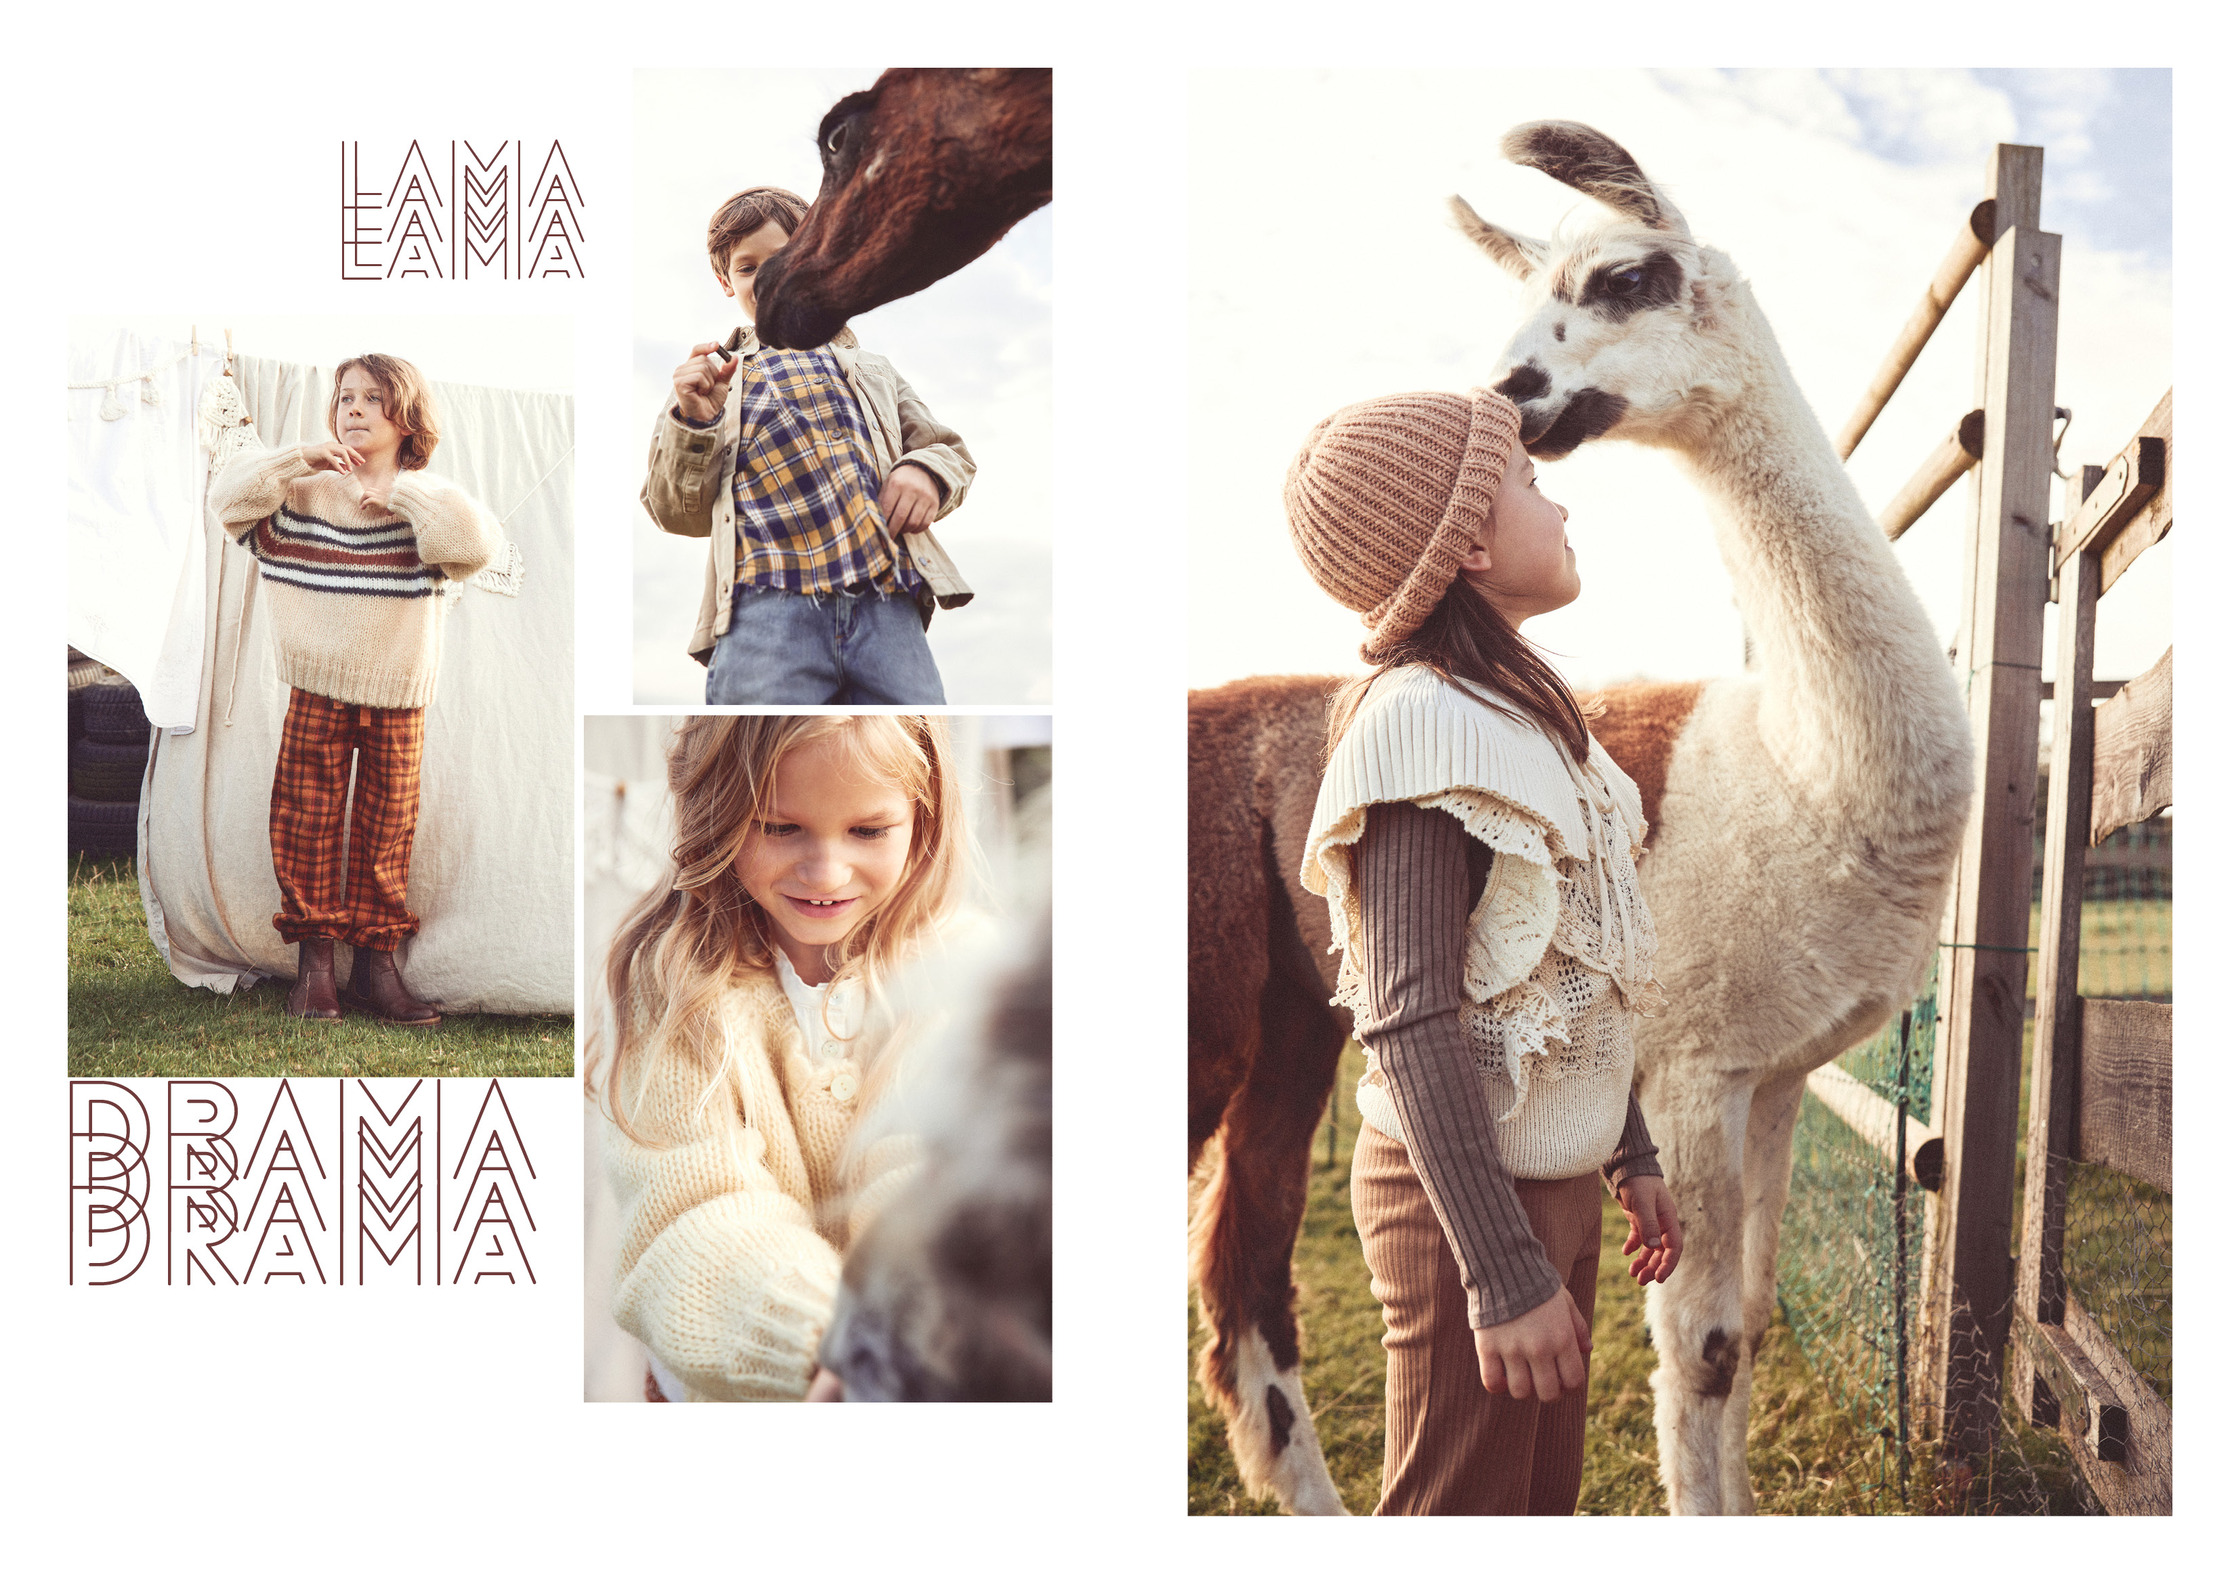 a picture of a girl with a llama and a boy with a llama